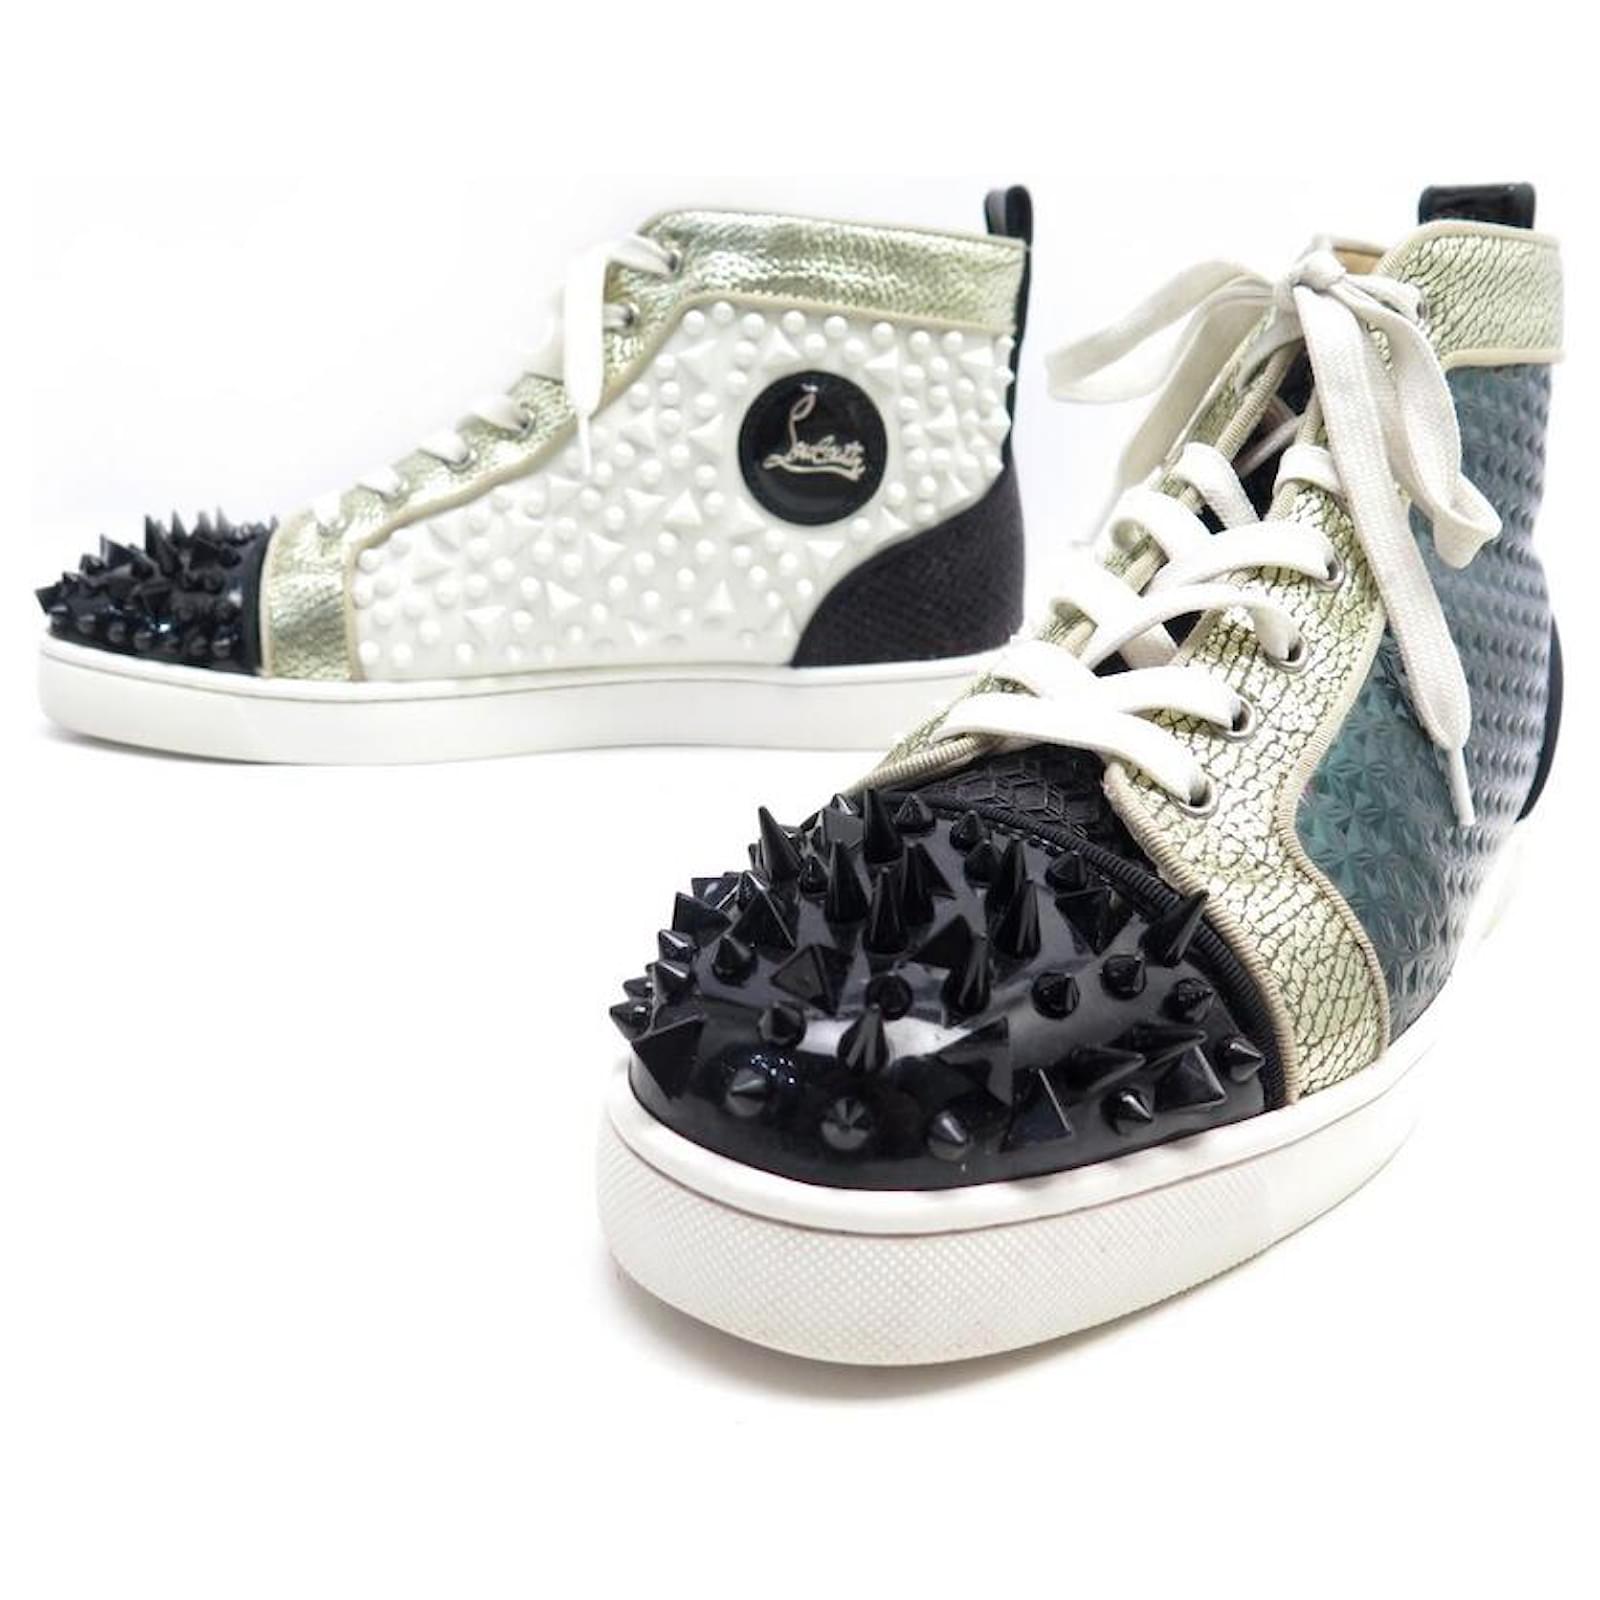 NEW CHRISTIAN LOUBOUTIN SNEAKERS LOUIS PIK BIS SHOES 45 LEATHER SHOES